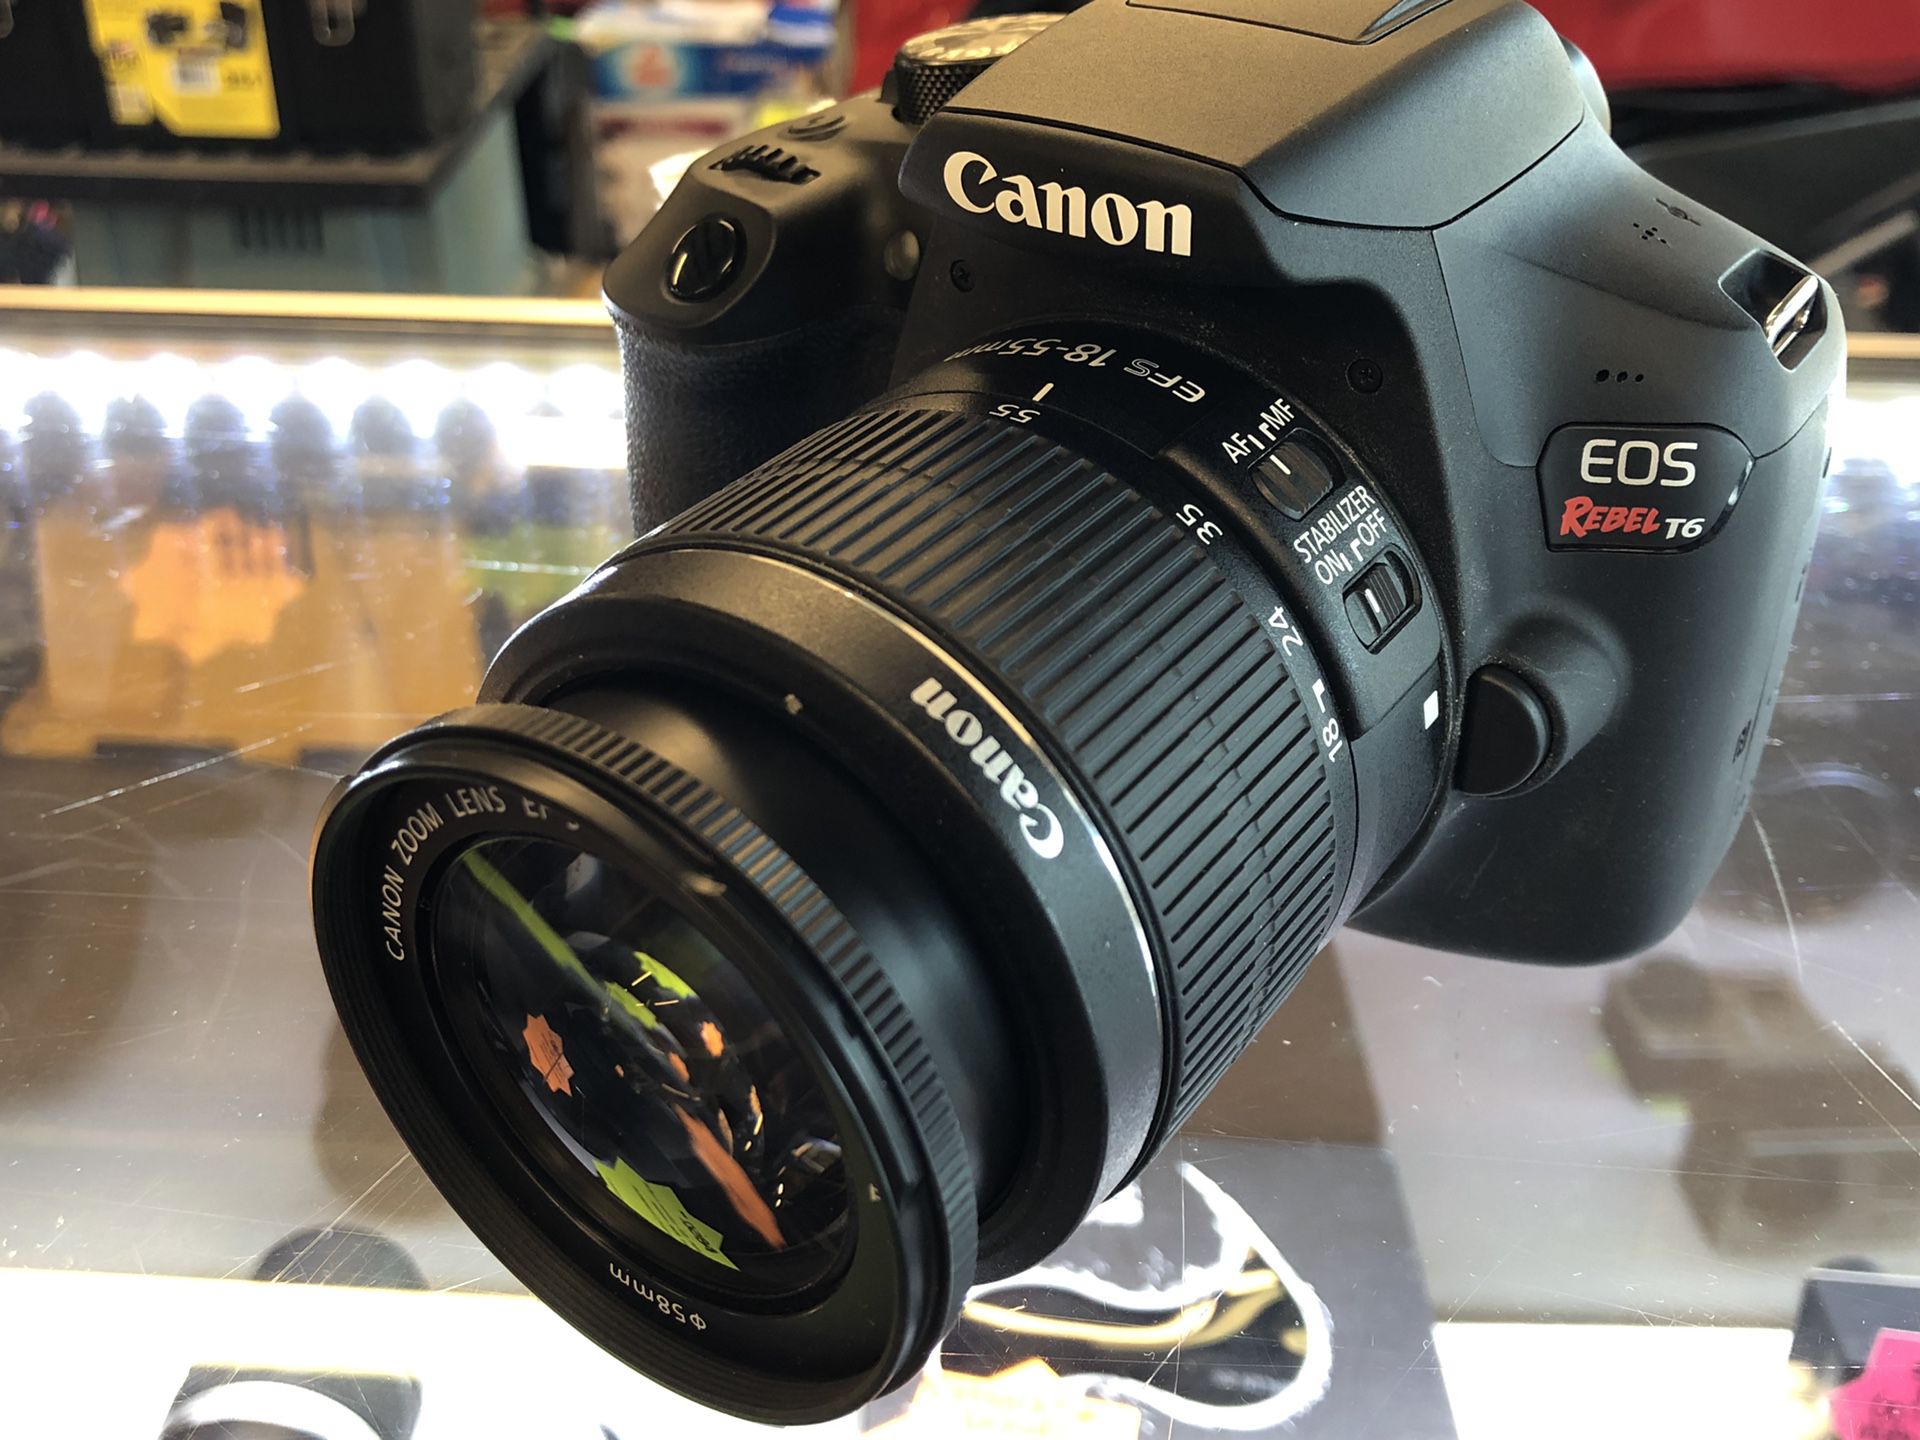 Canon EOS Rebel T6 with EFS Lens, Charger and Bag